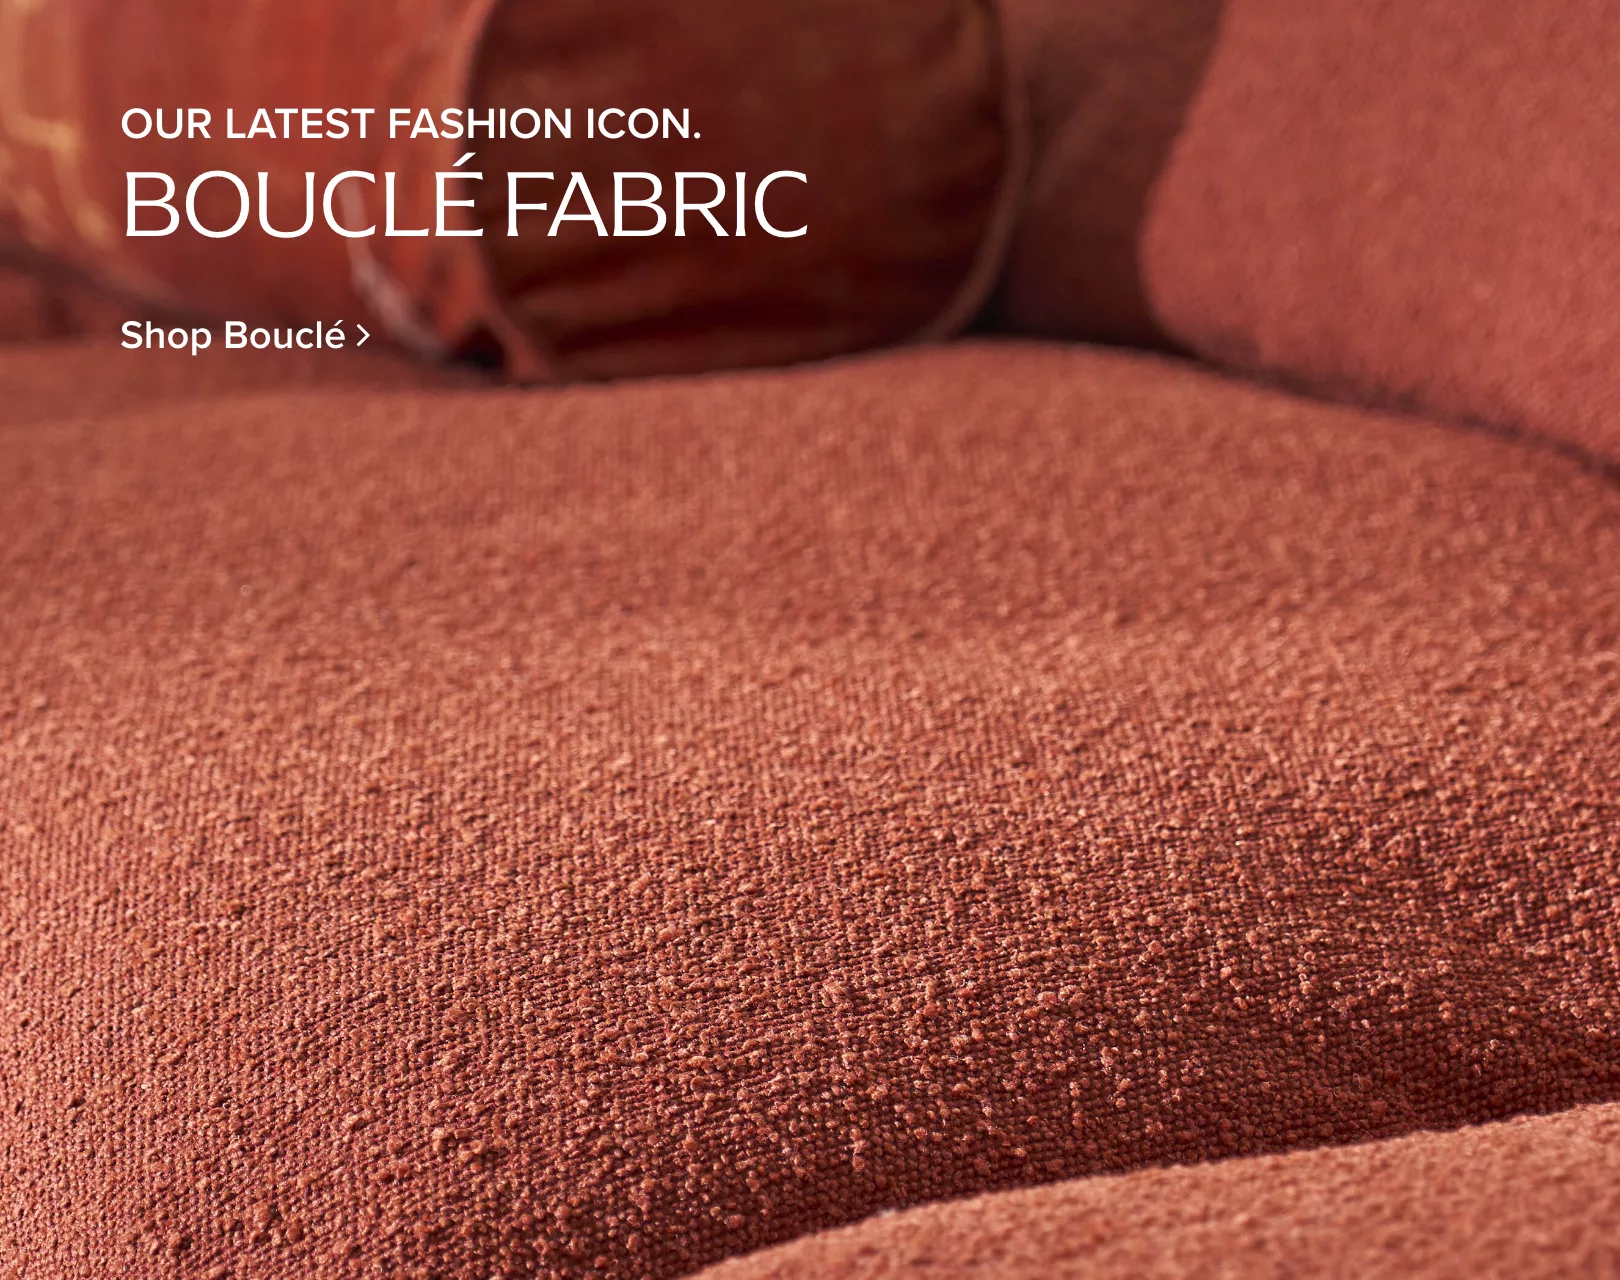 Our latest fashion icon, boucle fabrics See why boucle matters